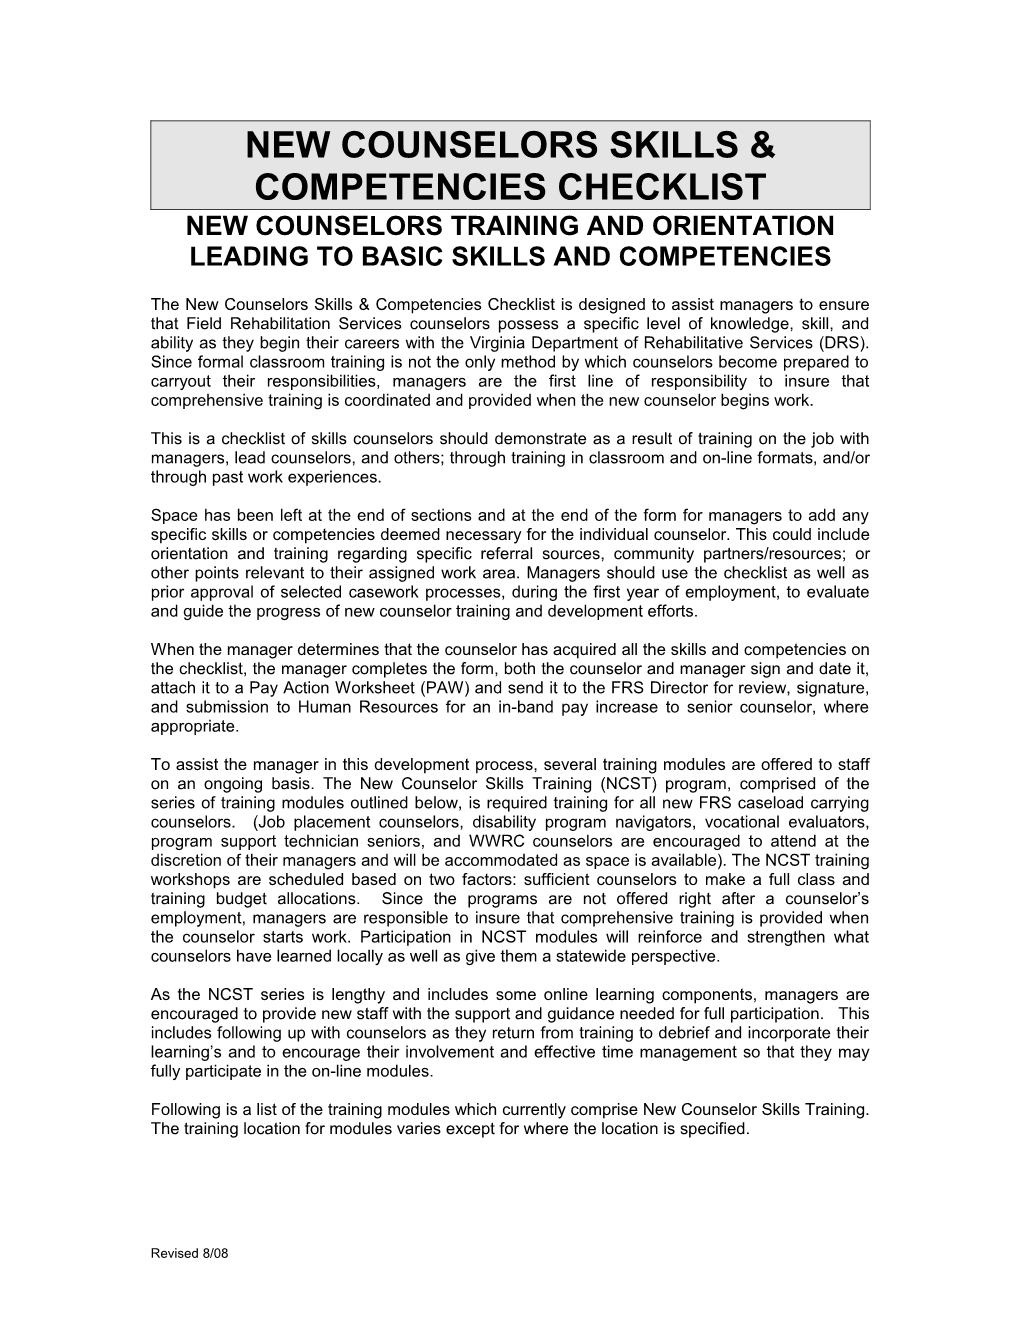 New Counselors Skills & Competencies Checklist